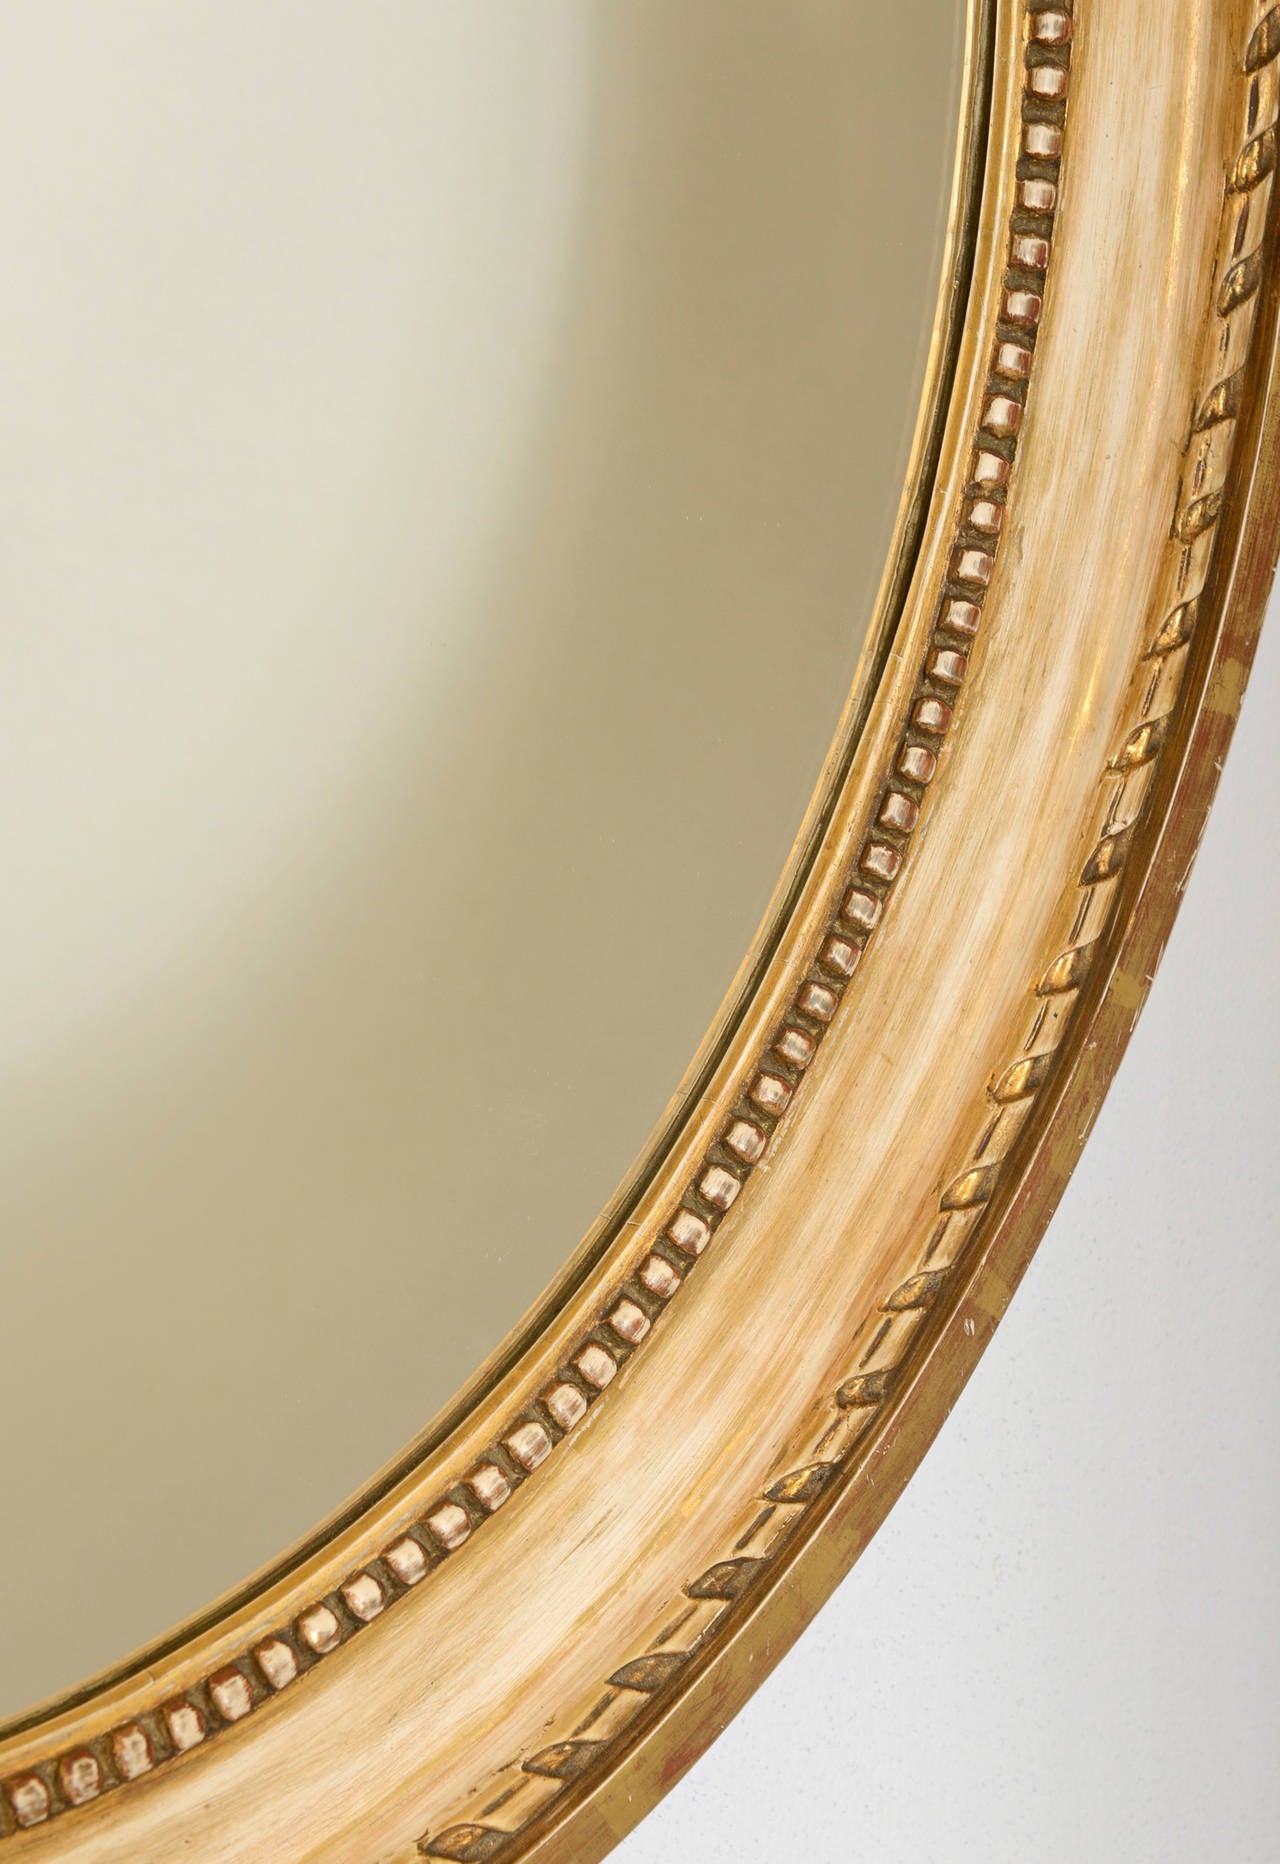 Pair of Swedish Antique Mirrors. Two beautiful antique mirrors in a classic oval shape. The frame is carved in a beaded and grooved pattern around the perimeter. They are painted a beige-white-gold-tone refreshed paint with gilded edges.